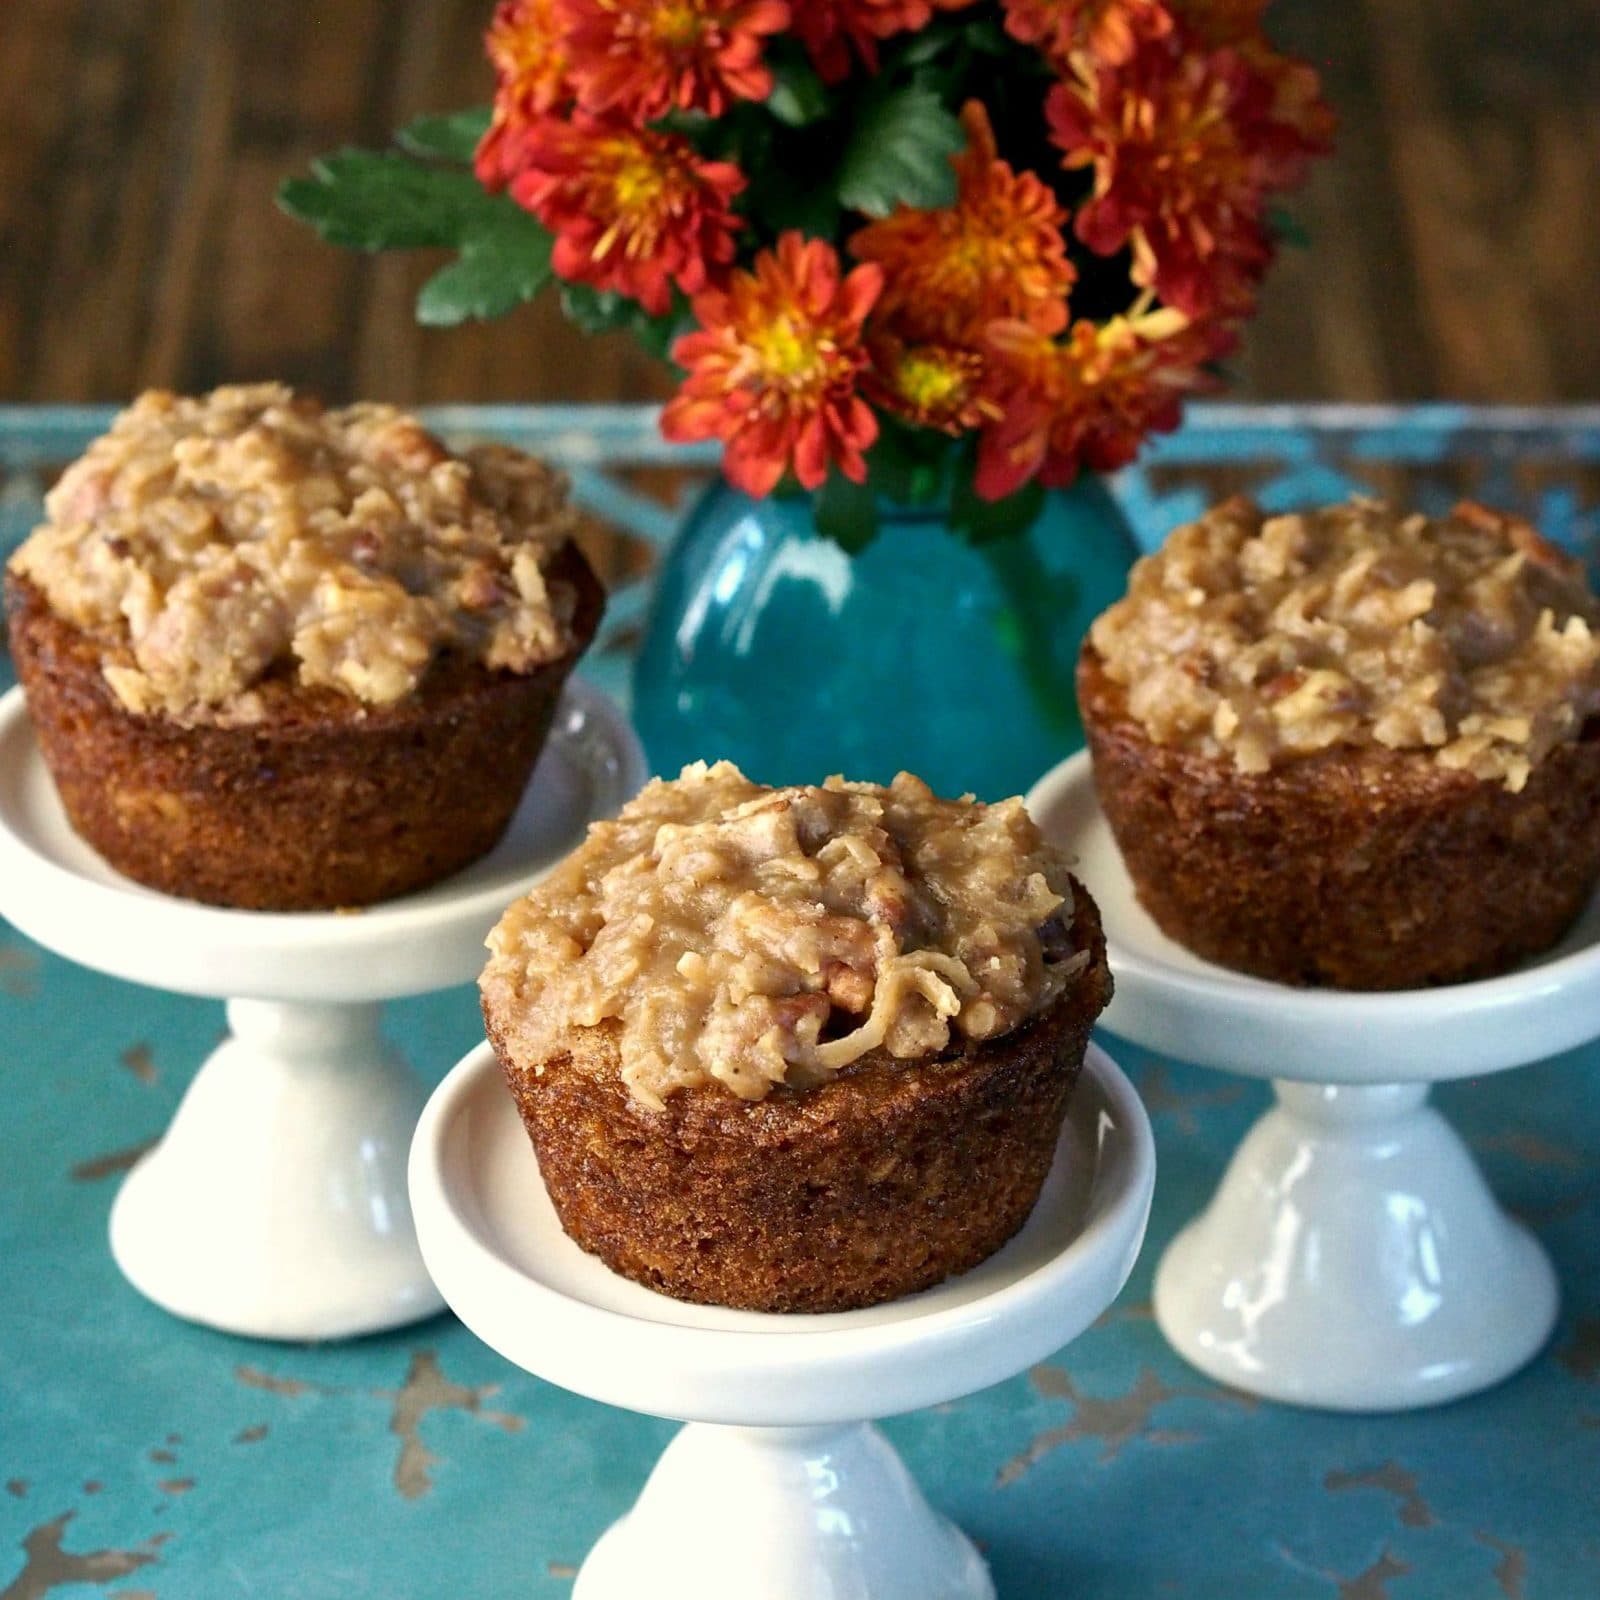 Old-Fashioned Oatmeal Cake & Cupcakes with Coconut Pecan Frosting. Moist, fall-spiced cake packed with flavor & topped, while warm, with perfect frosting. Simply Sated